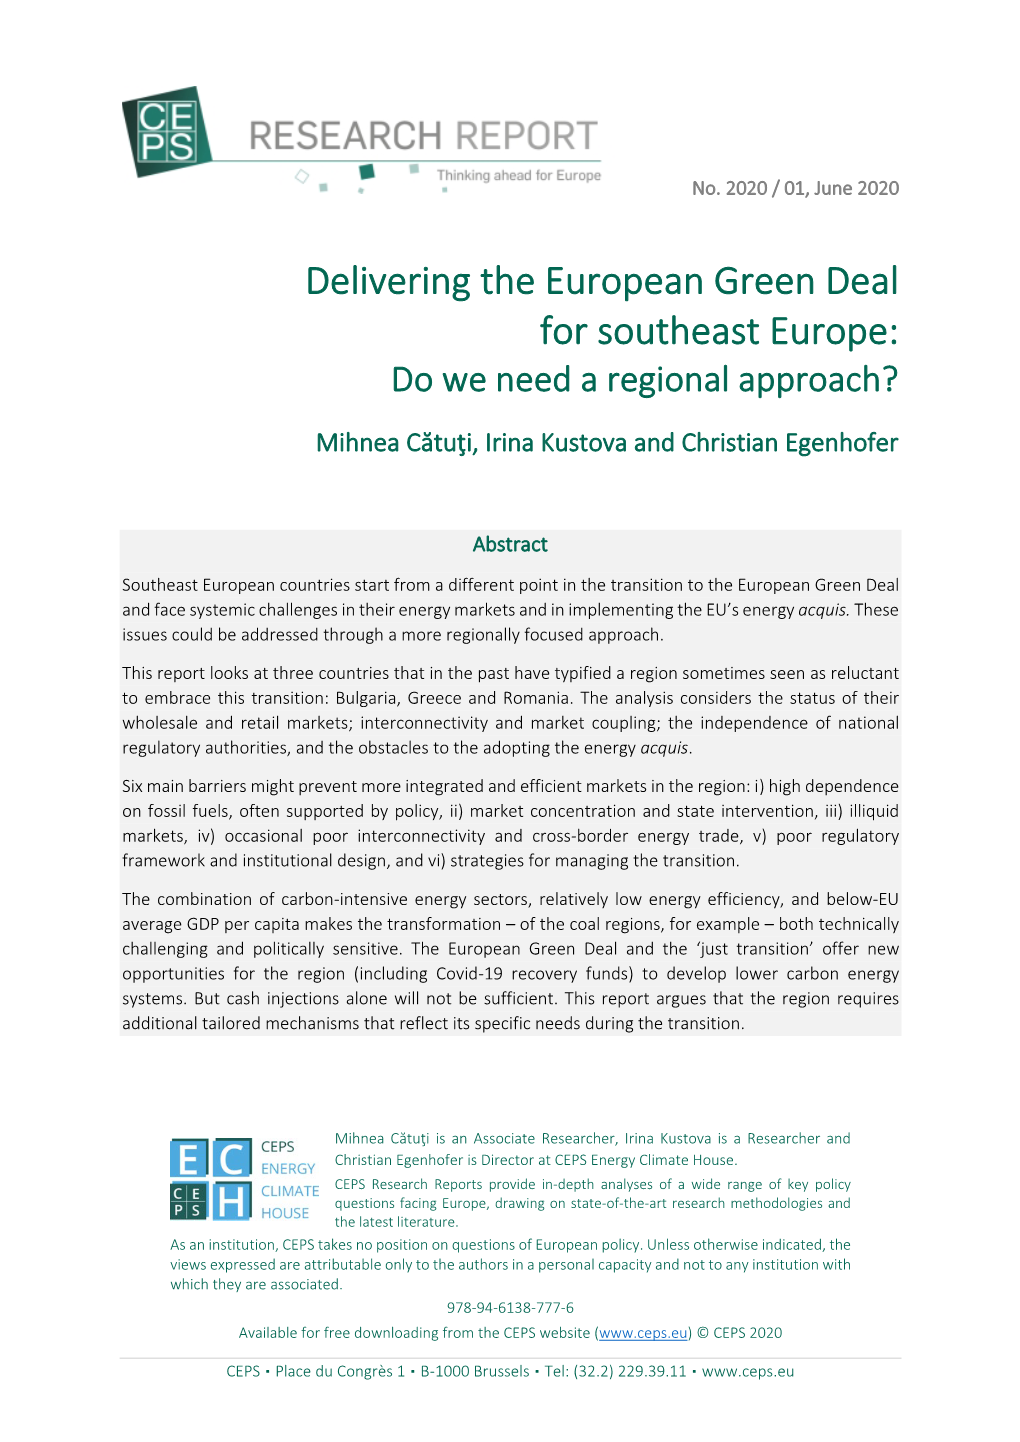 Delivering the European Green Deal for Southeast Europe: Do We Need a Regional Approach?